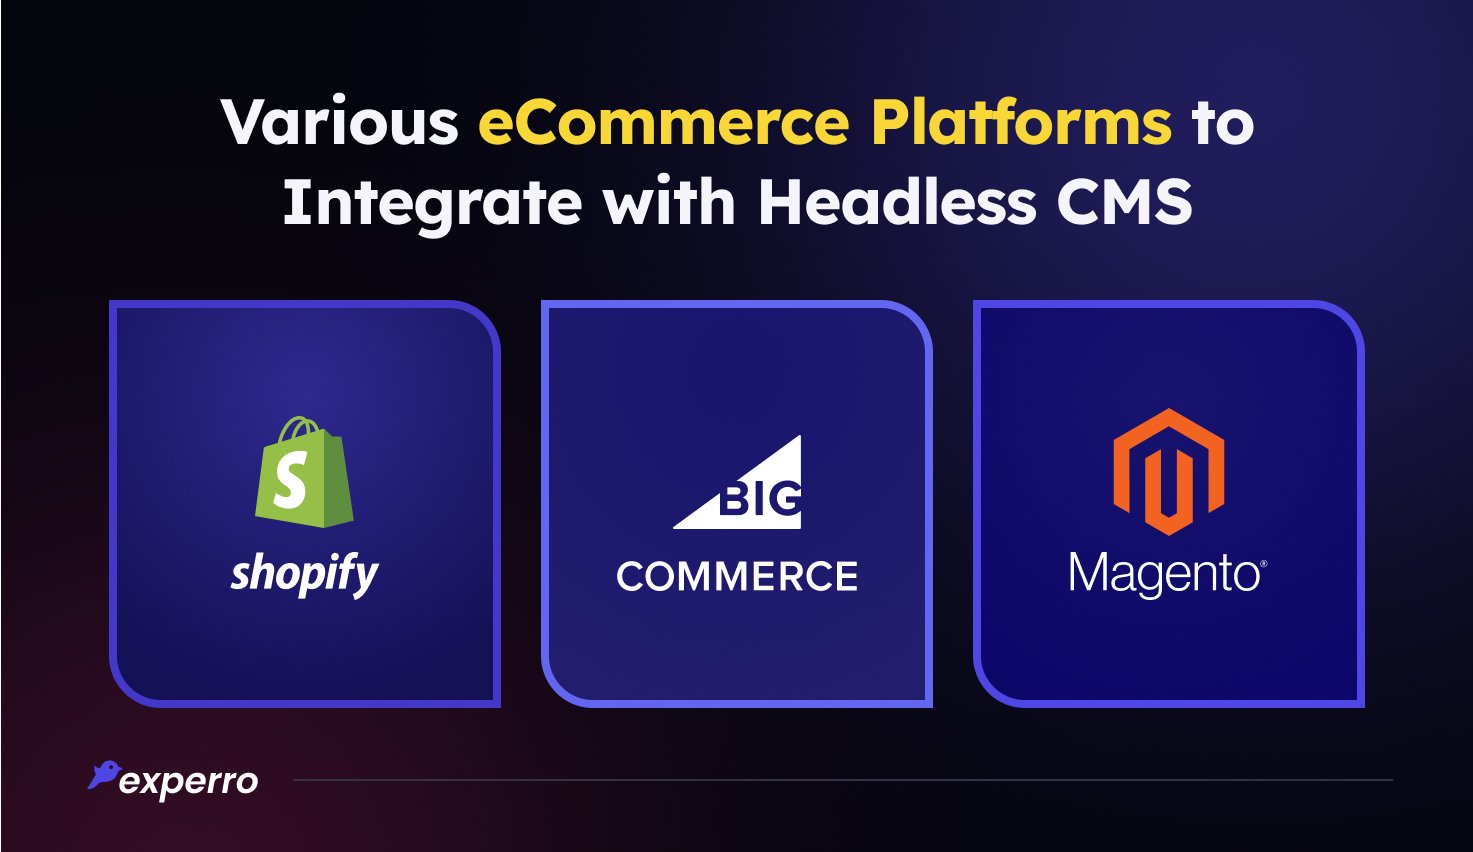 Top eCommerce Platforms that Integrate with Headless CMS